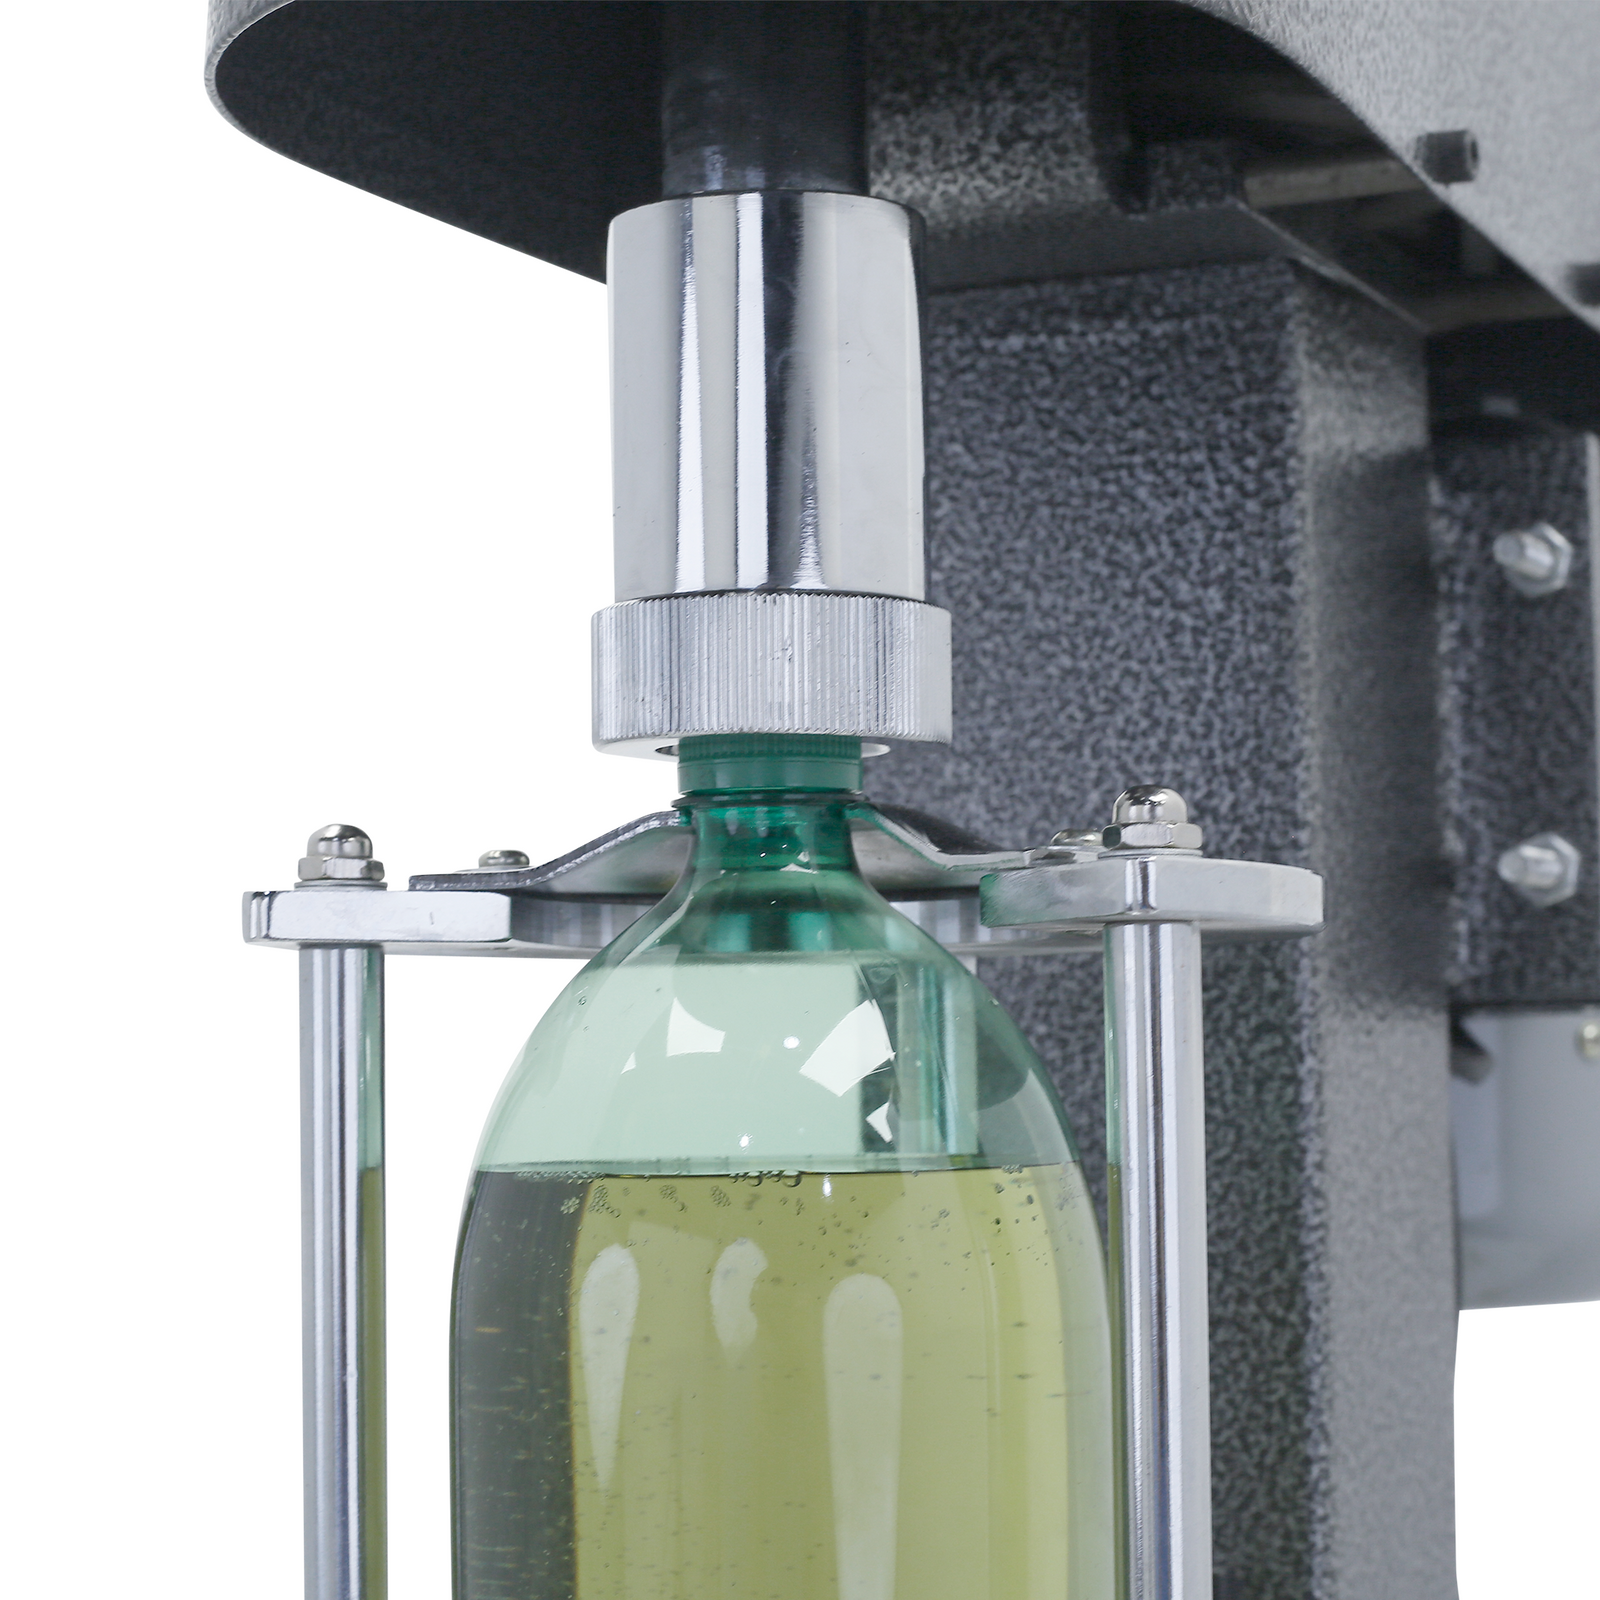 close up of JORESTECH semi-automatic gray bottle capper with green plastic bottle filled with green liquid inserted. The capper is screwing the cap in the green bottle.